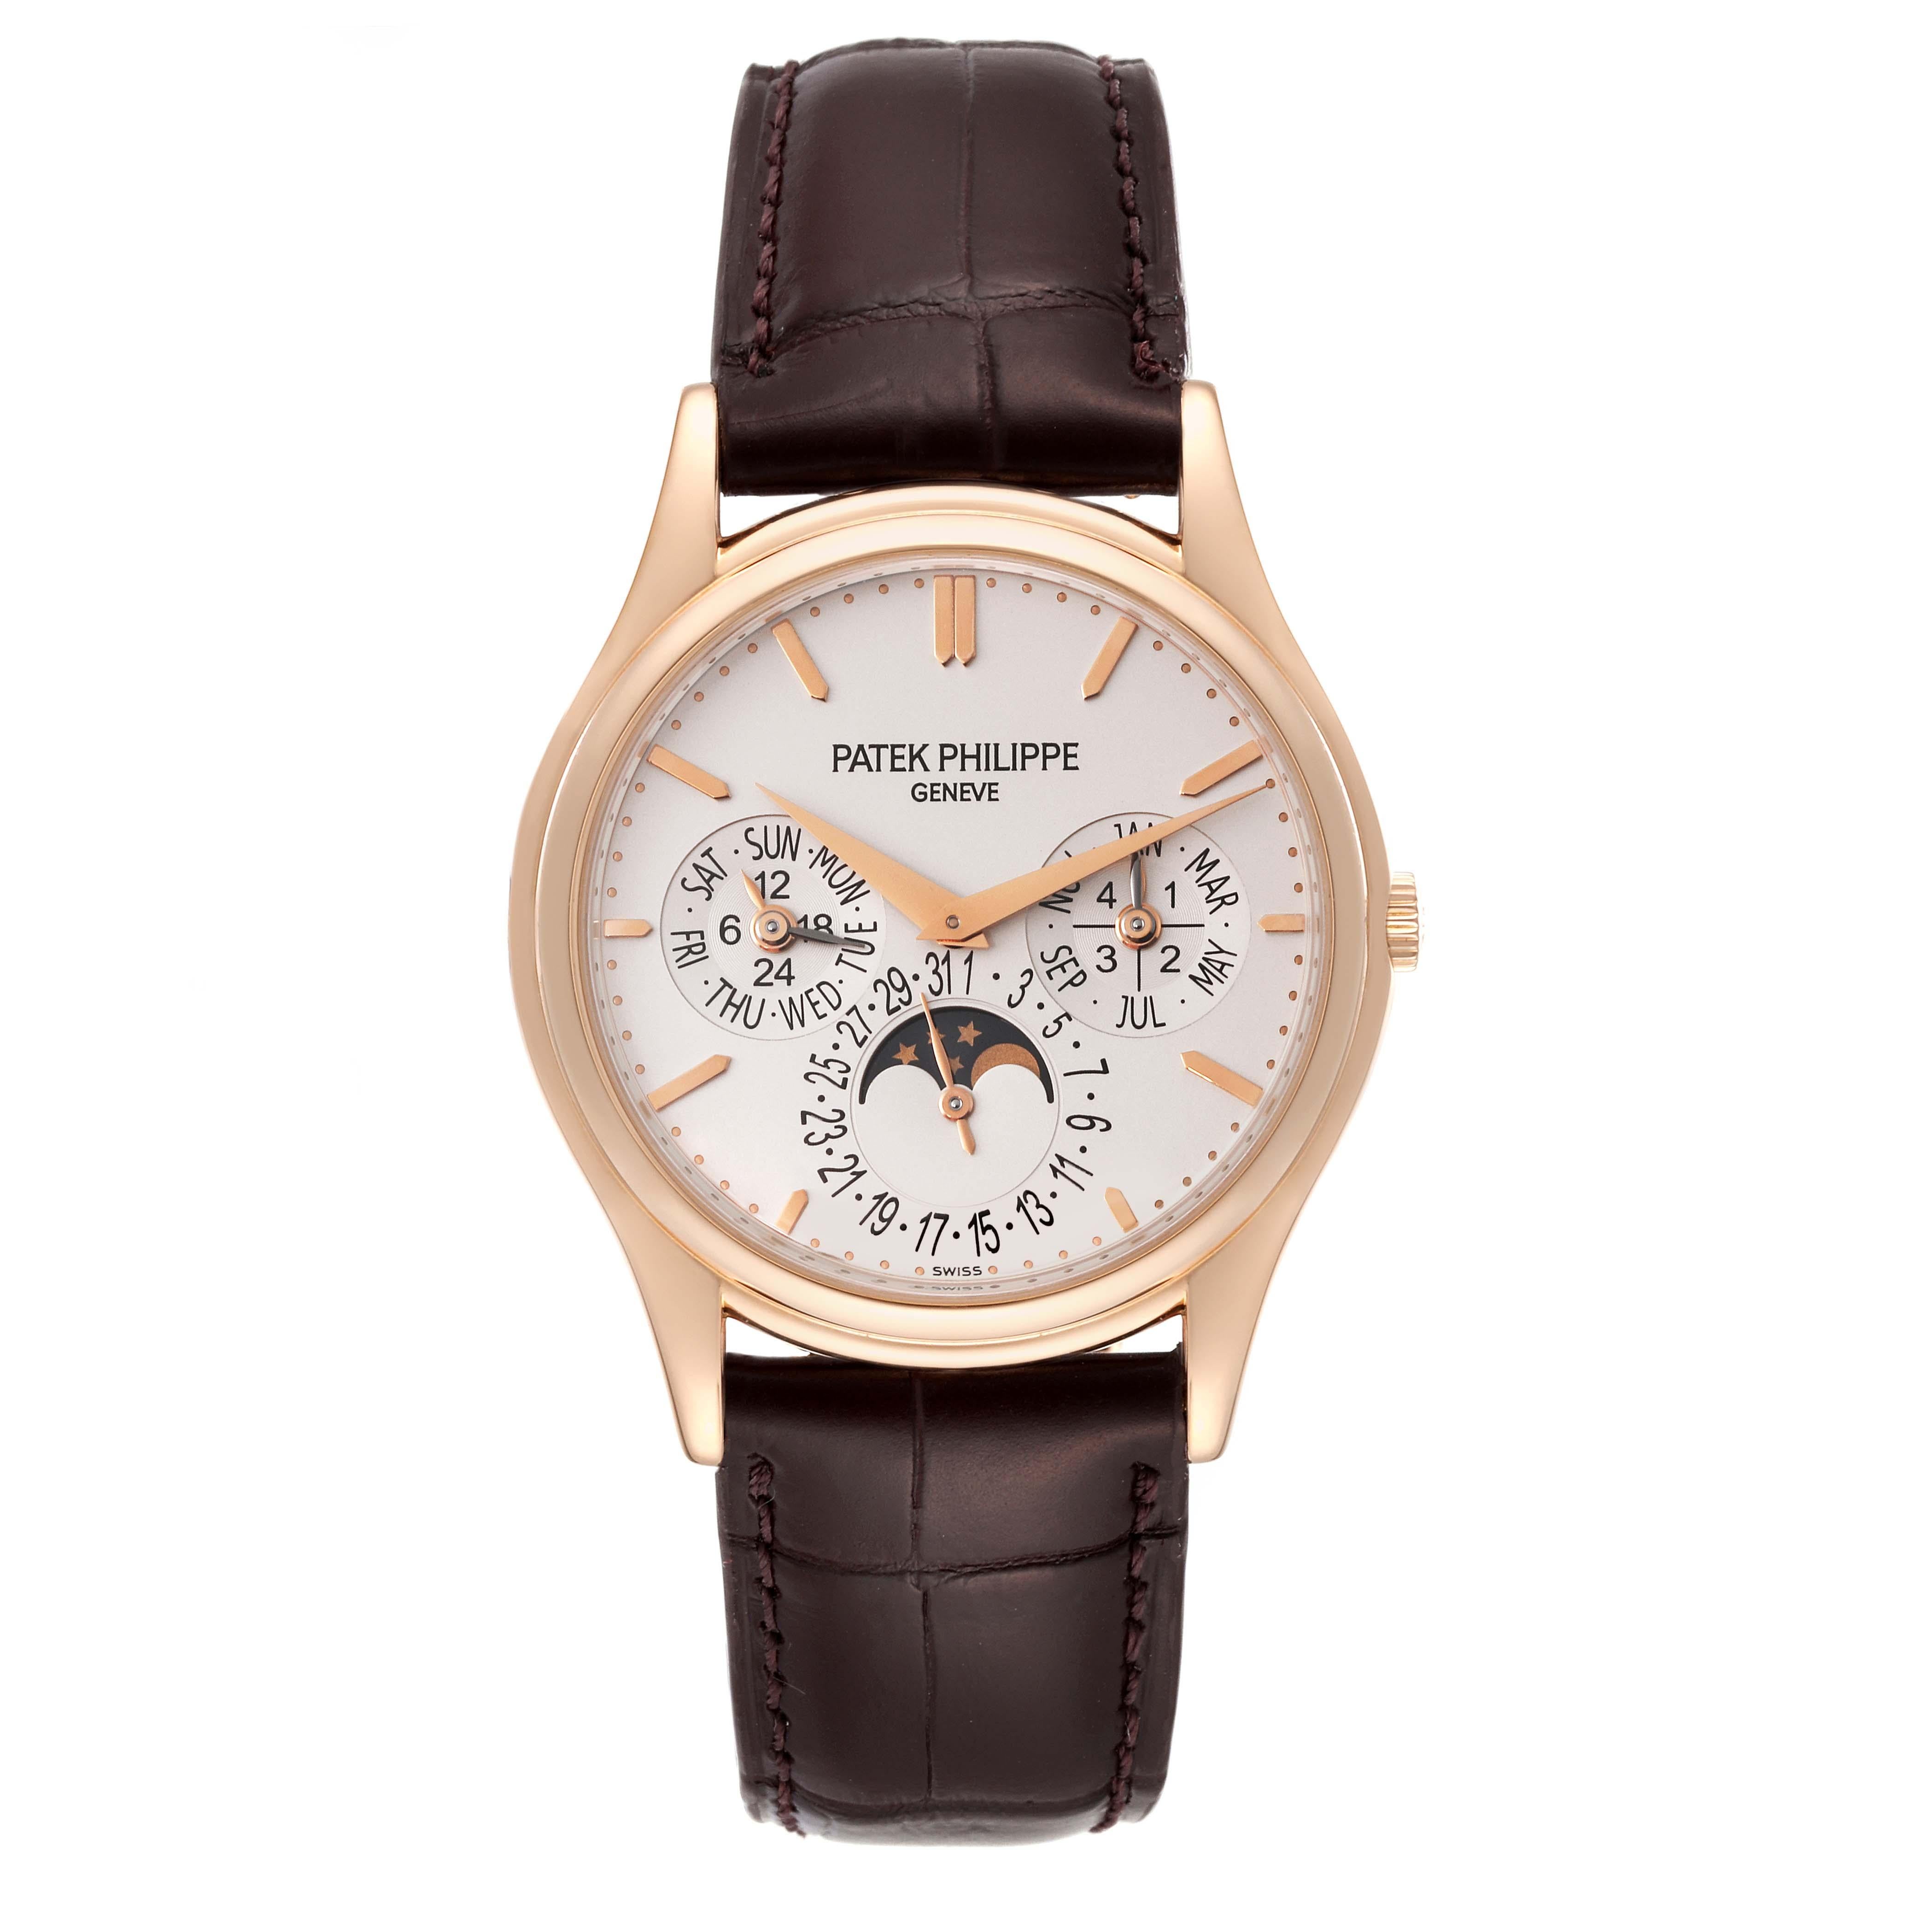 Patek Philippe Complicated Perpetual Calendar Rose Gold Mens Watch 5140R. Automatic movement. Rhodium plated, fausses cotes decoration, straight-line lever escapement, Gyromax balance adjusted to heat, cold, isochronism and 5 positions, shock